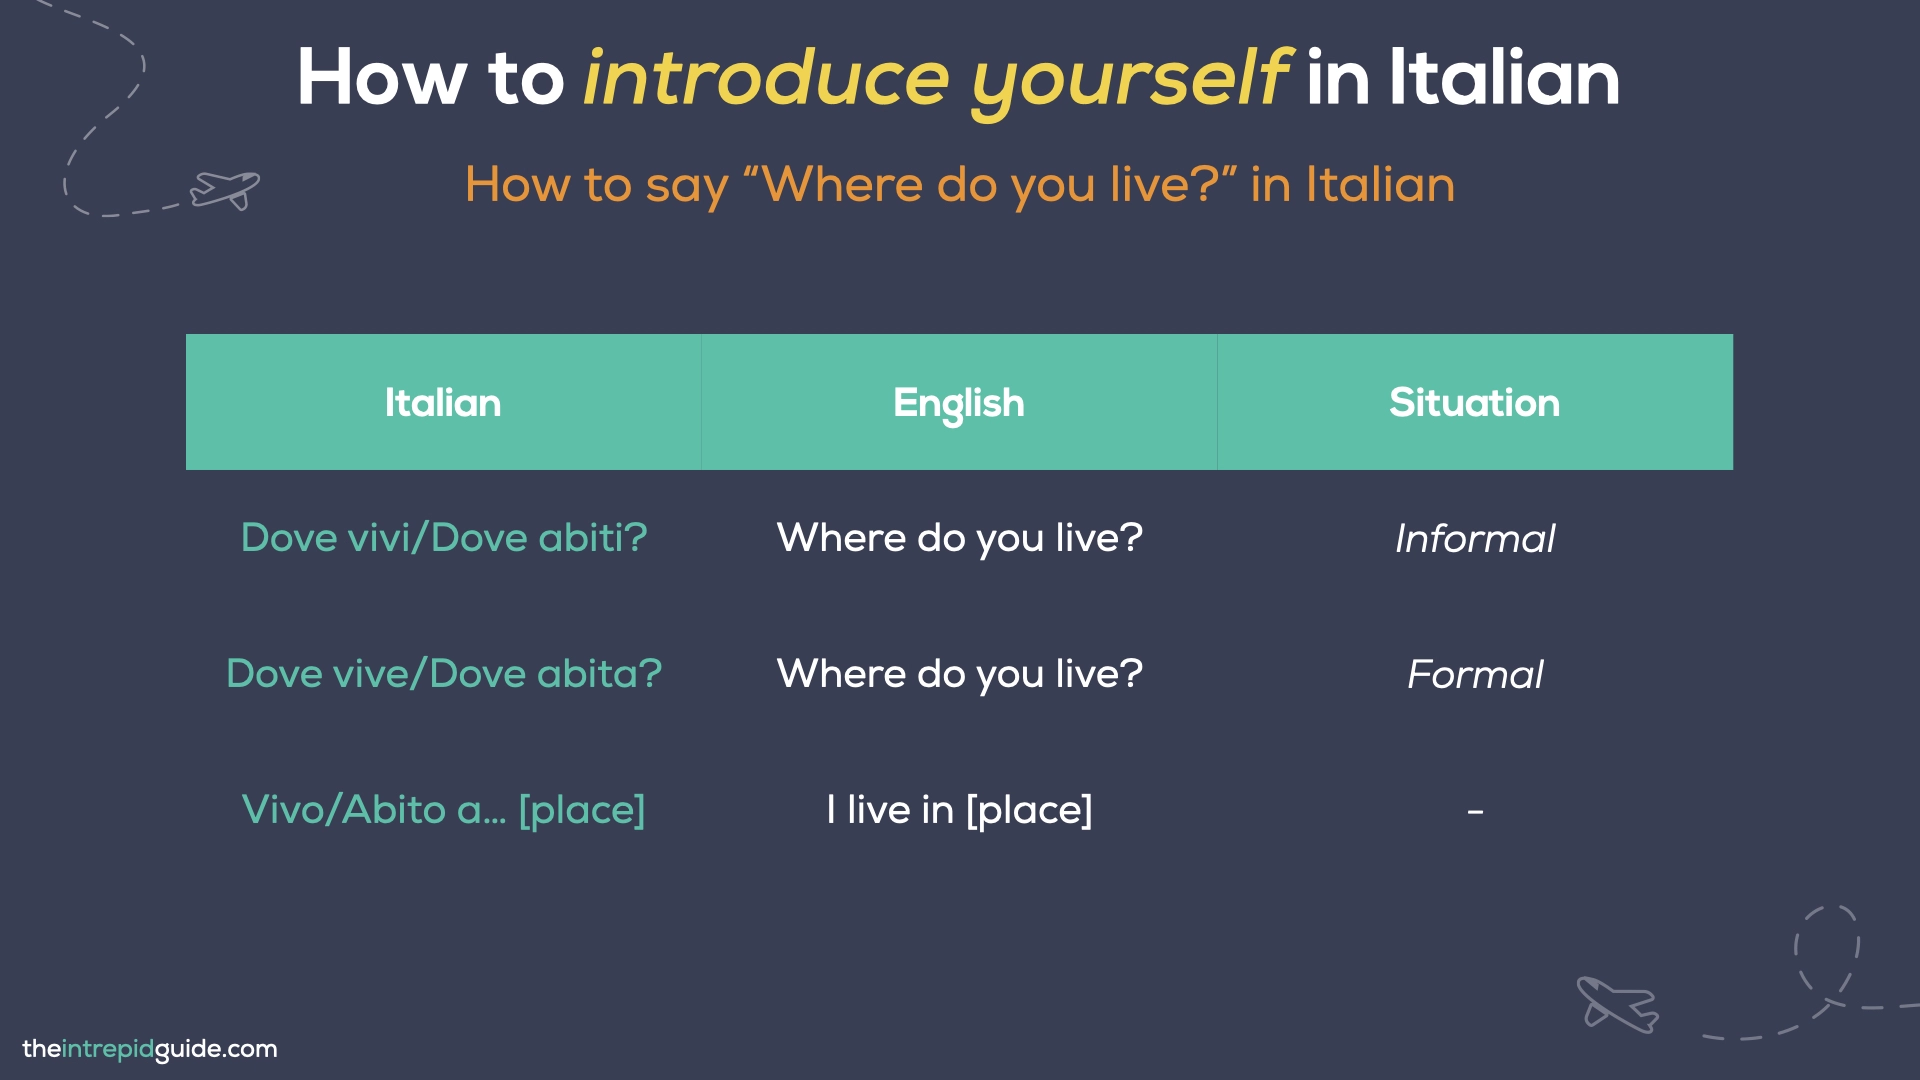 How to introduce yourself in Italian - How to say Where do you live in Italian